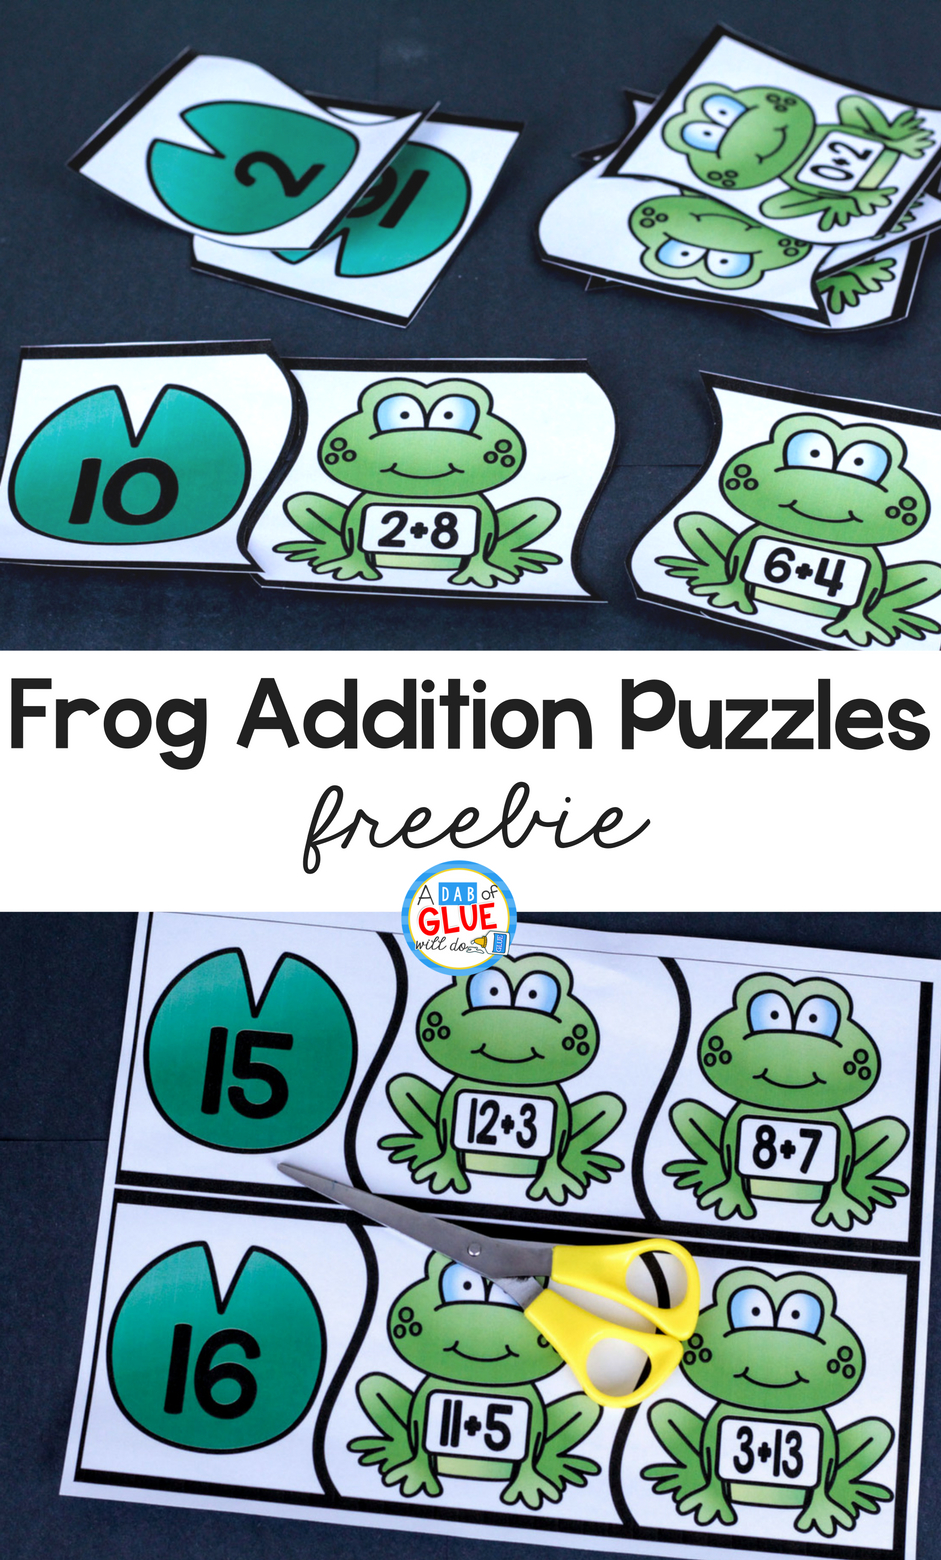 Frog Addition Puzzles - - Printable Frog Puzzle